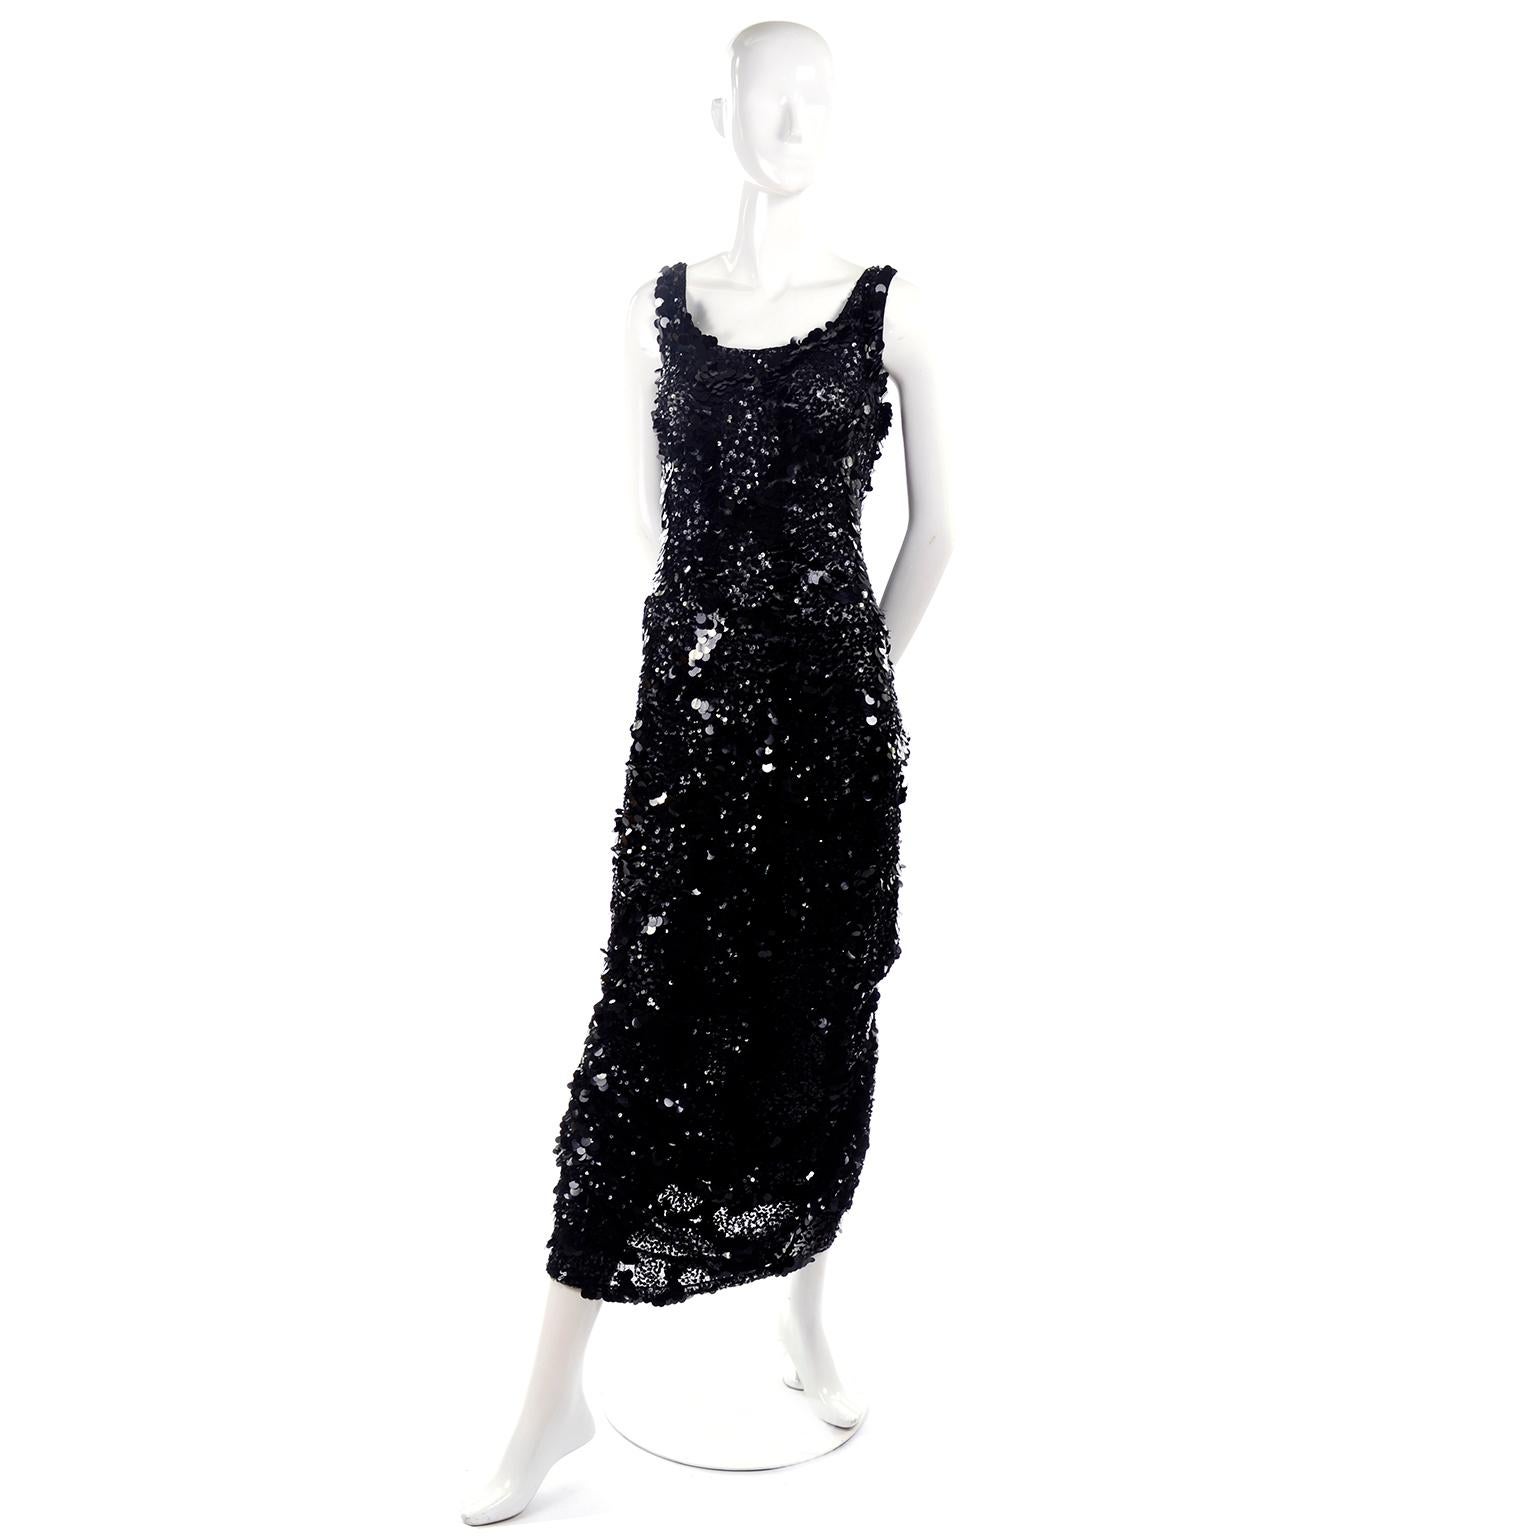 This incredible vintage evening gown is made of a fine mesh net and is entirely covered in shimmering small sequins and large paillettes. The dress is sultry and gives off old Hollywood vibes with a modern twist! The most unique thing about this